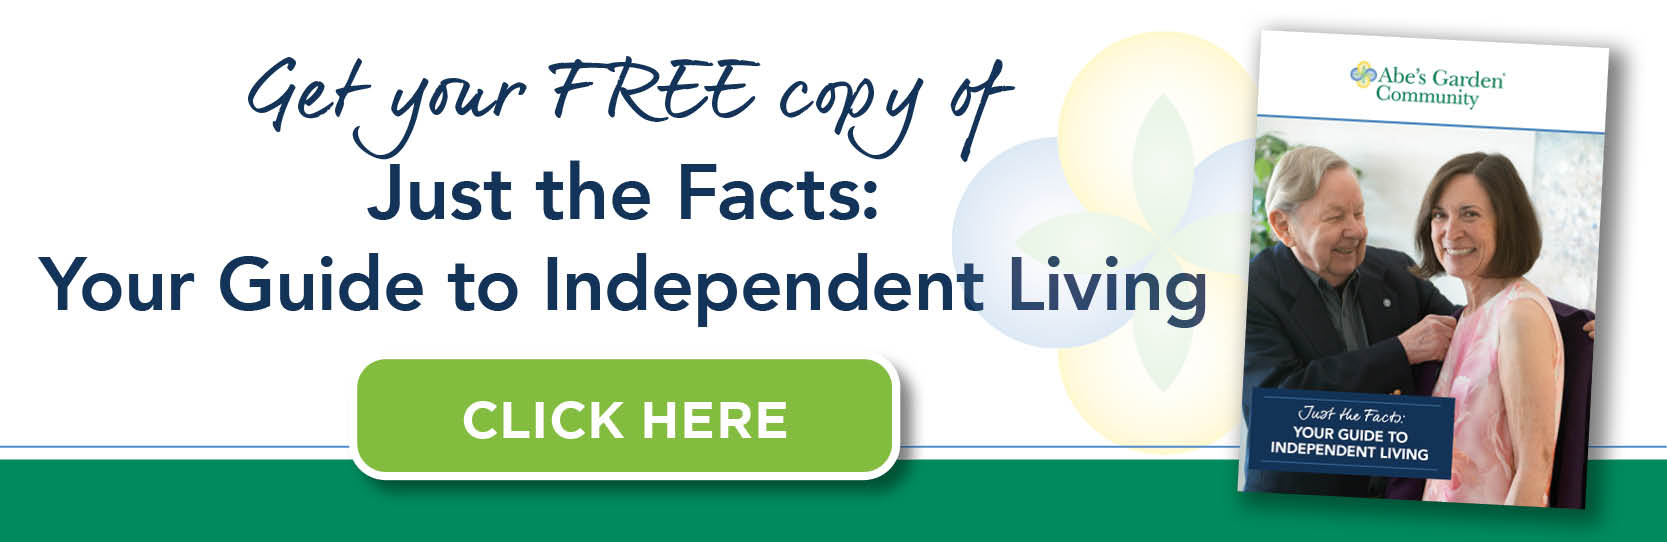 Just the Facts Independent Living Guide/></a>

			</div>
			</div>
				
				
				
				
			</div>
				
				
			</div>		</div>
	</div>
	    </div>
    
	<footer class=